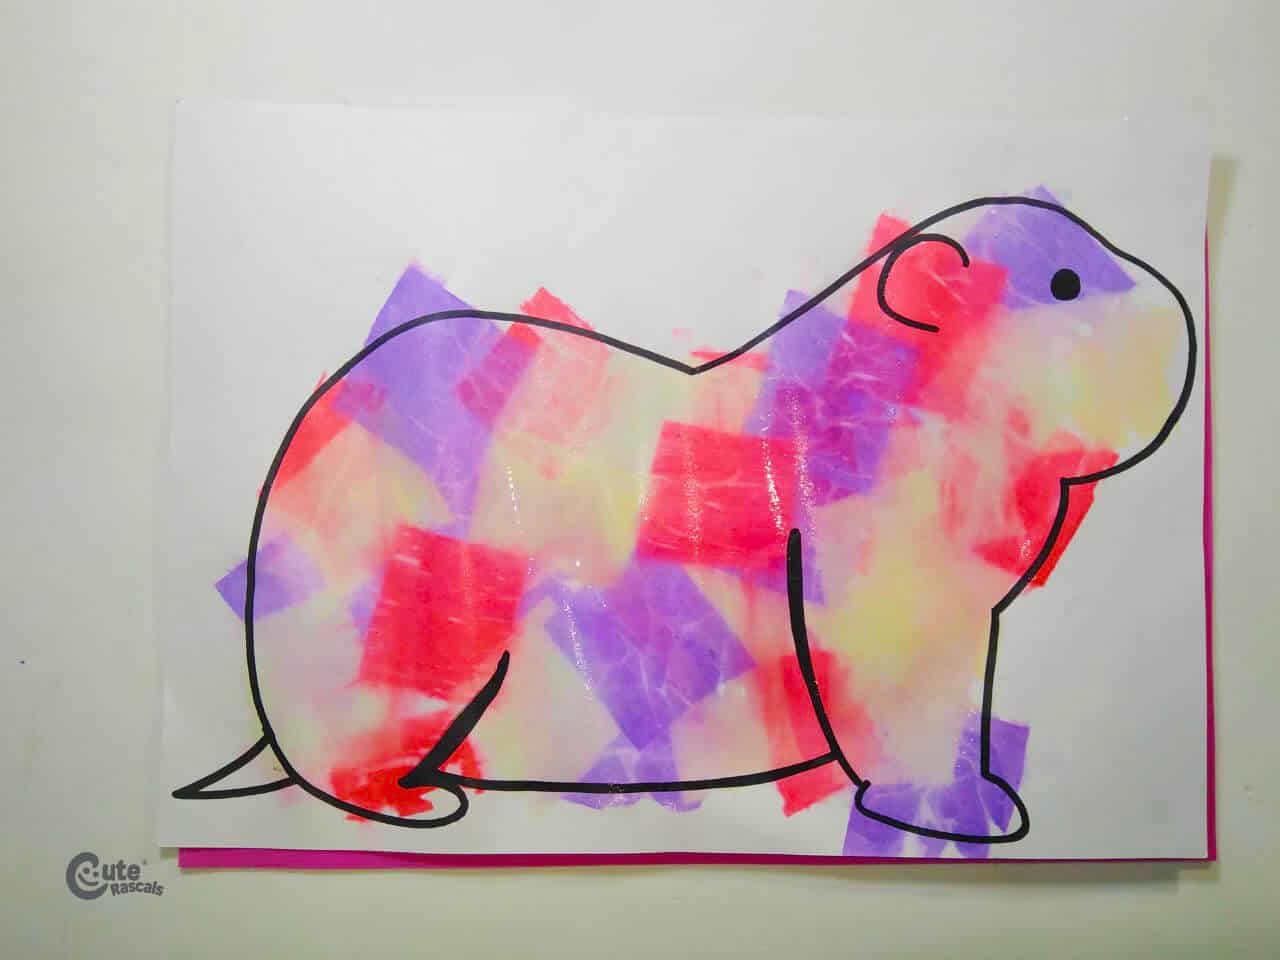 groundhog art made with color papers. water art for preschoolers